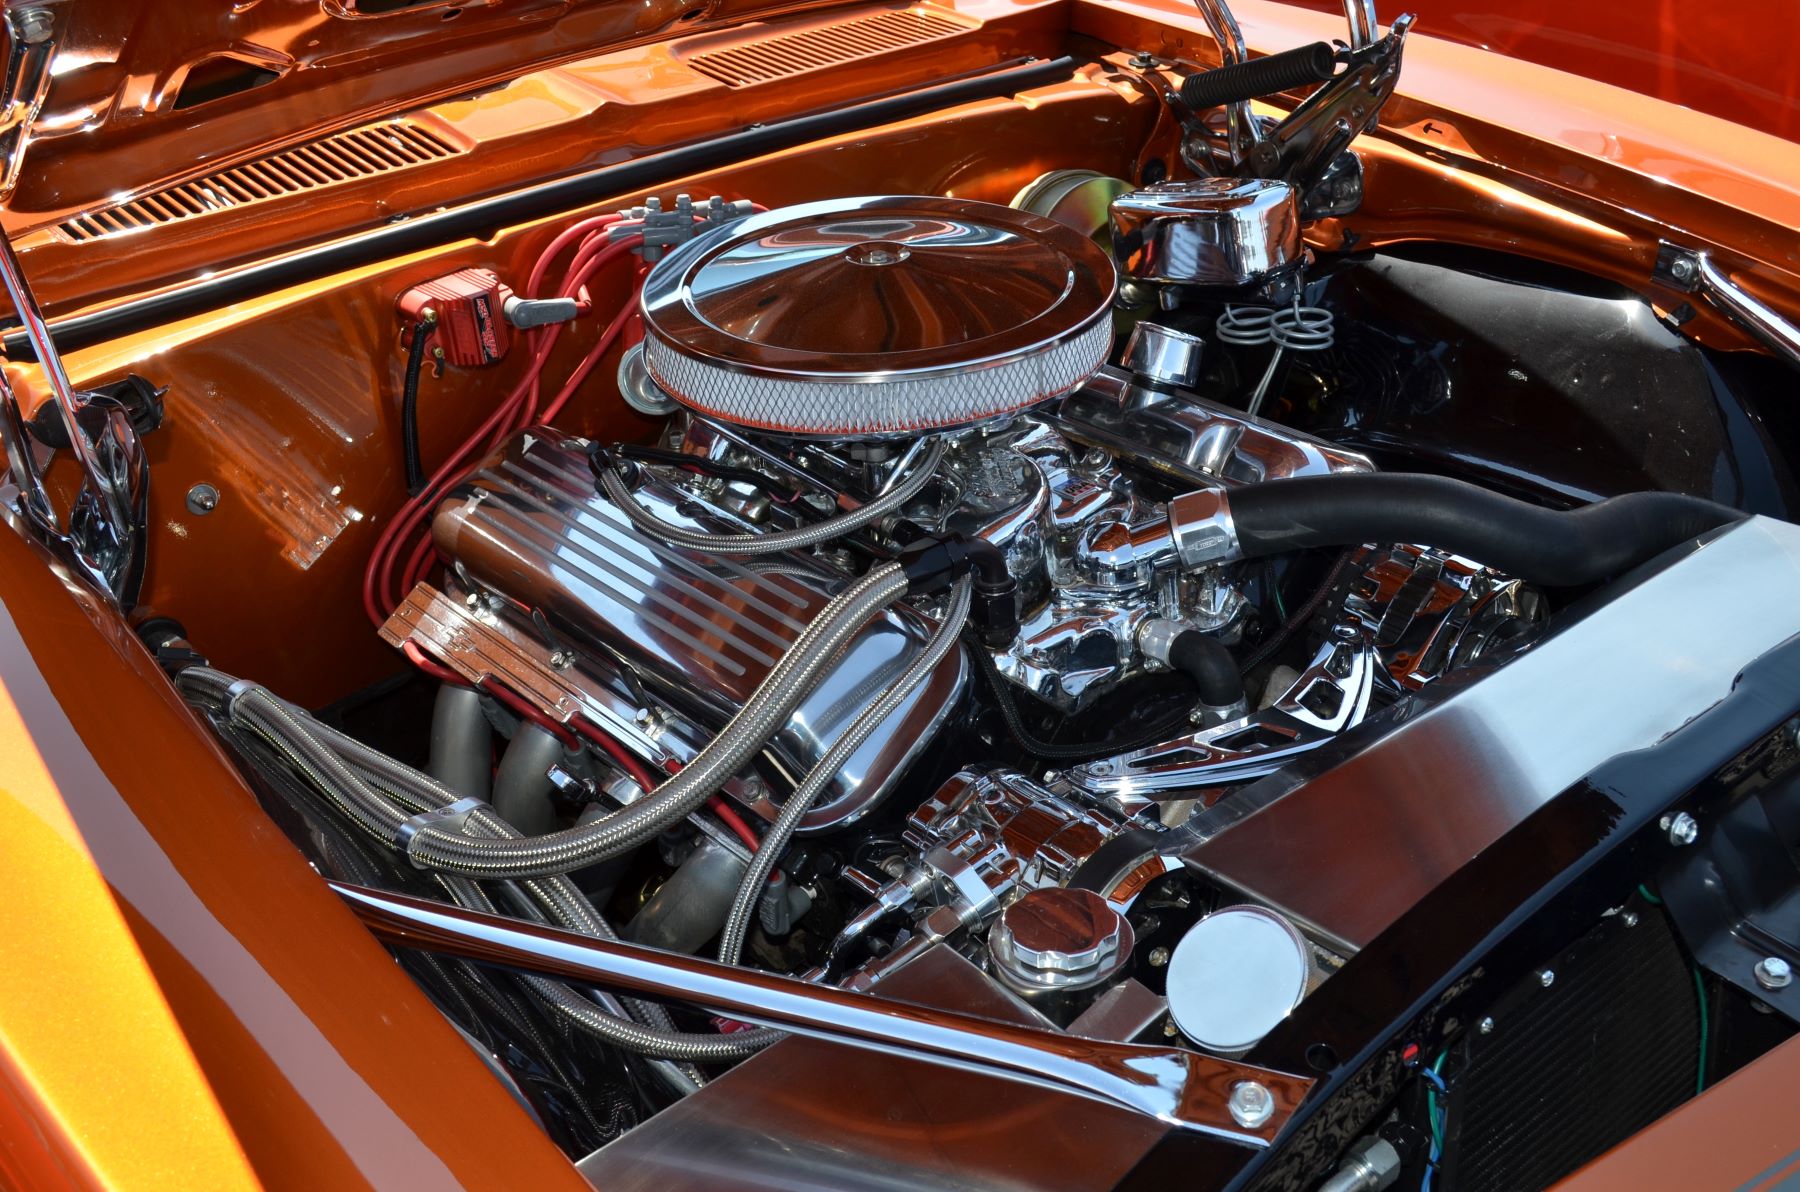 A 1967 Chevy Camaro big block V8 engine on display at the Hot August Nights Custom Car Show in Reno, Nevada